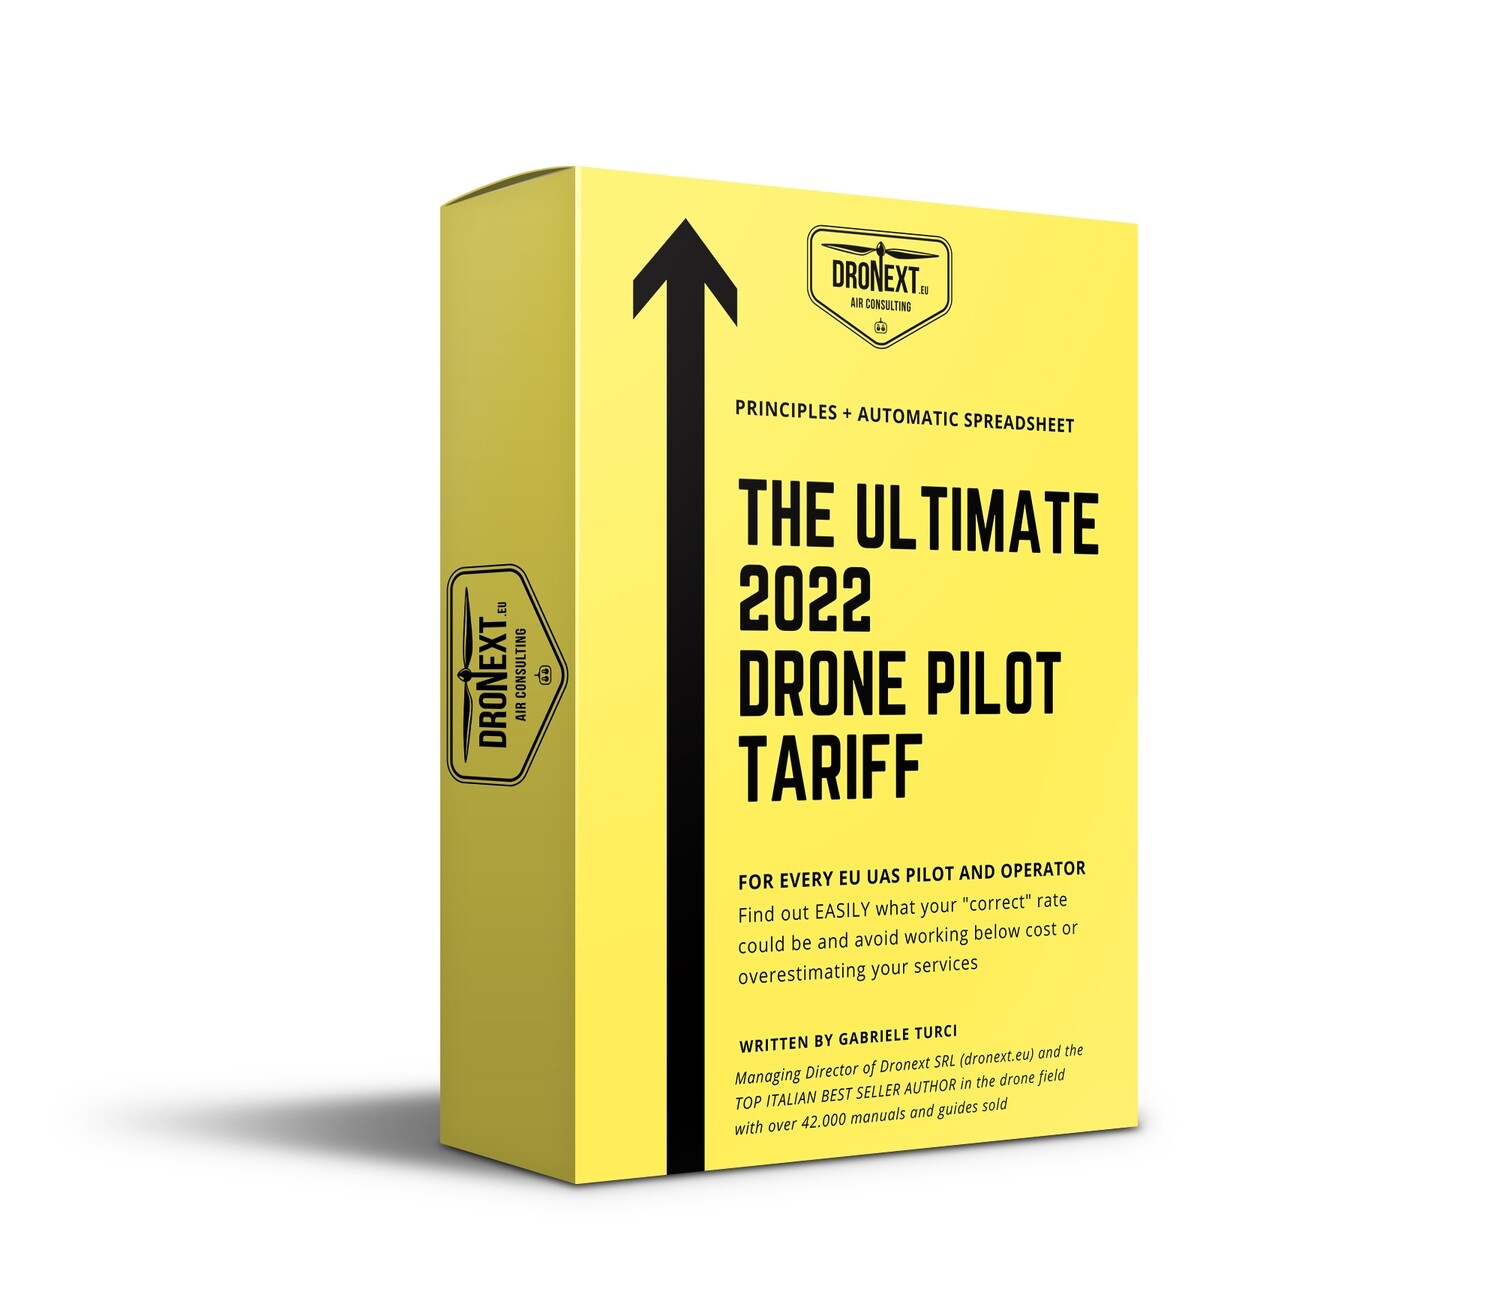 THE ULTIMATE 2022 DRONE PILOT TARIFF: PRINCIPLES + AUTOMATIC SPREADSHEET (EUROPE EDITION)